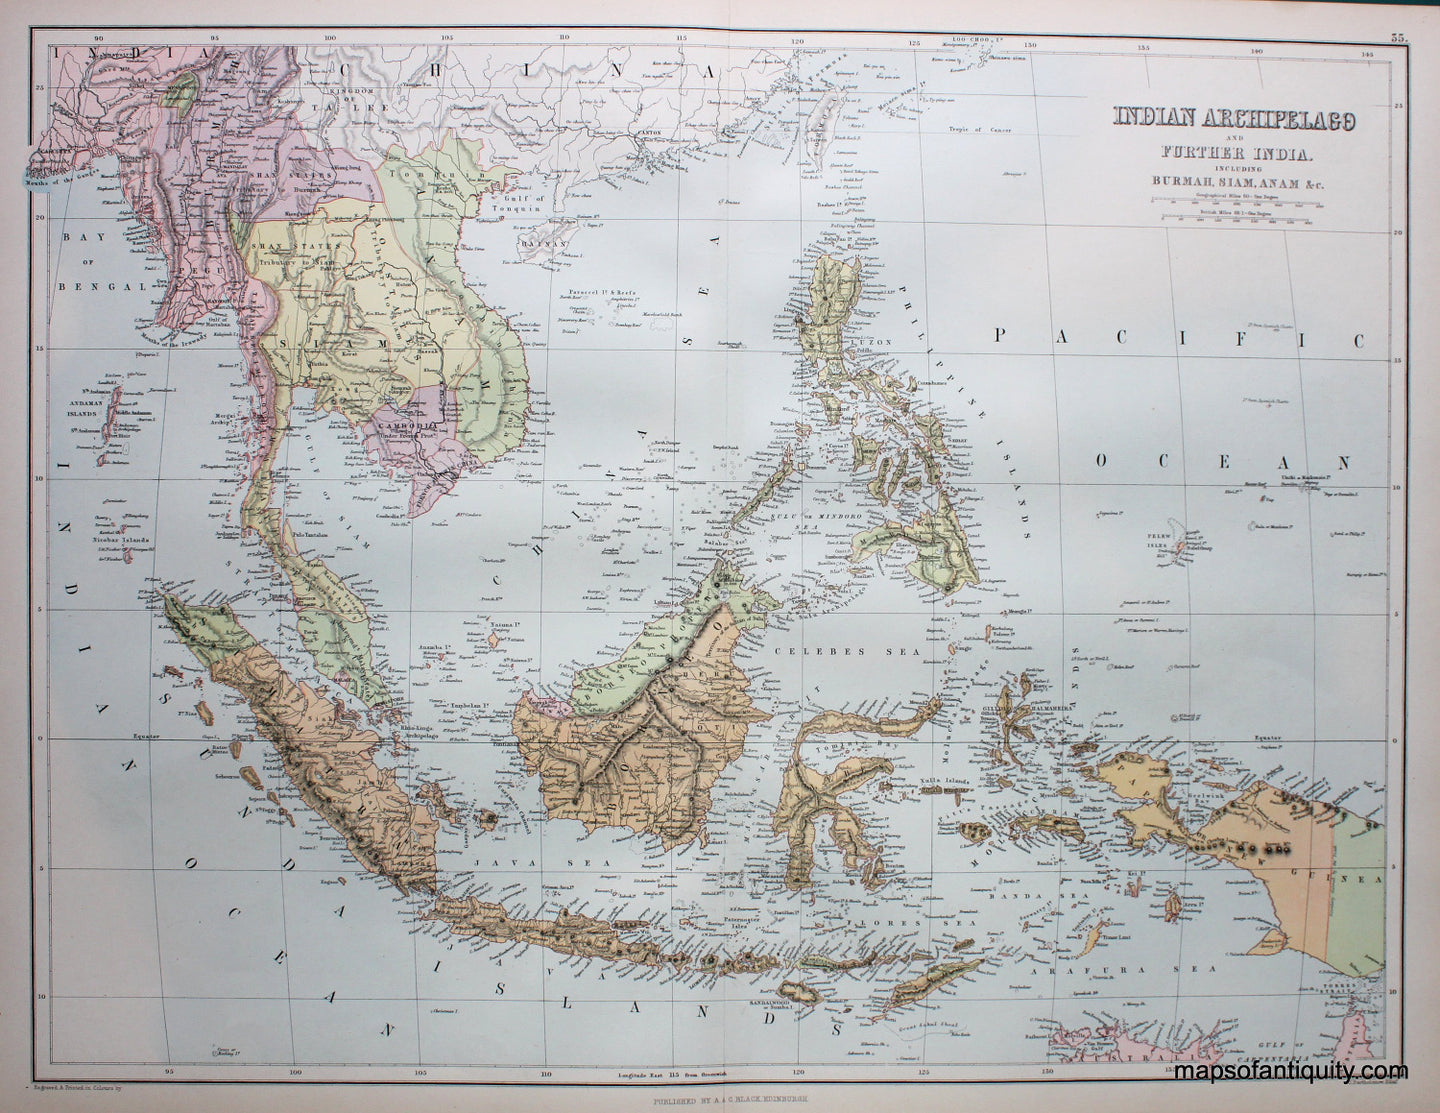 Antique-Map-Printed-Color-Indian-Archipelago-and-Further-India-including-Burmah-Siam-Anam-etc.-****-Asia-Southeast-Asia-and-Indonesia-1879-Black-Maps-Of-Antiquity